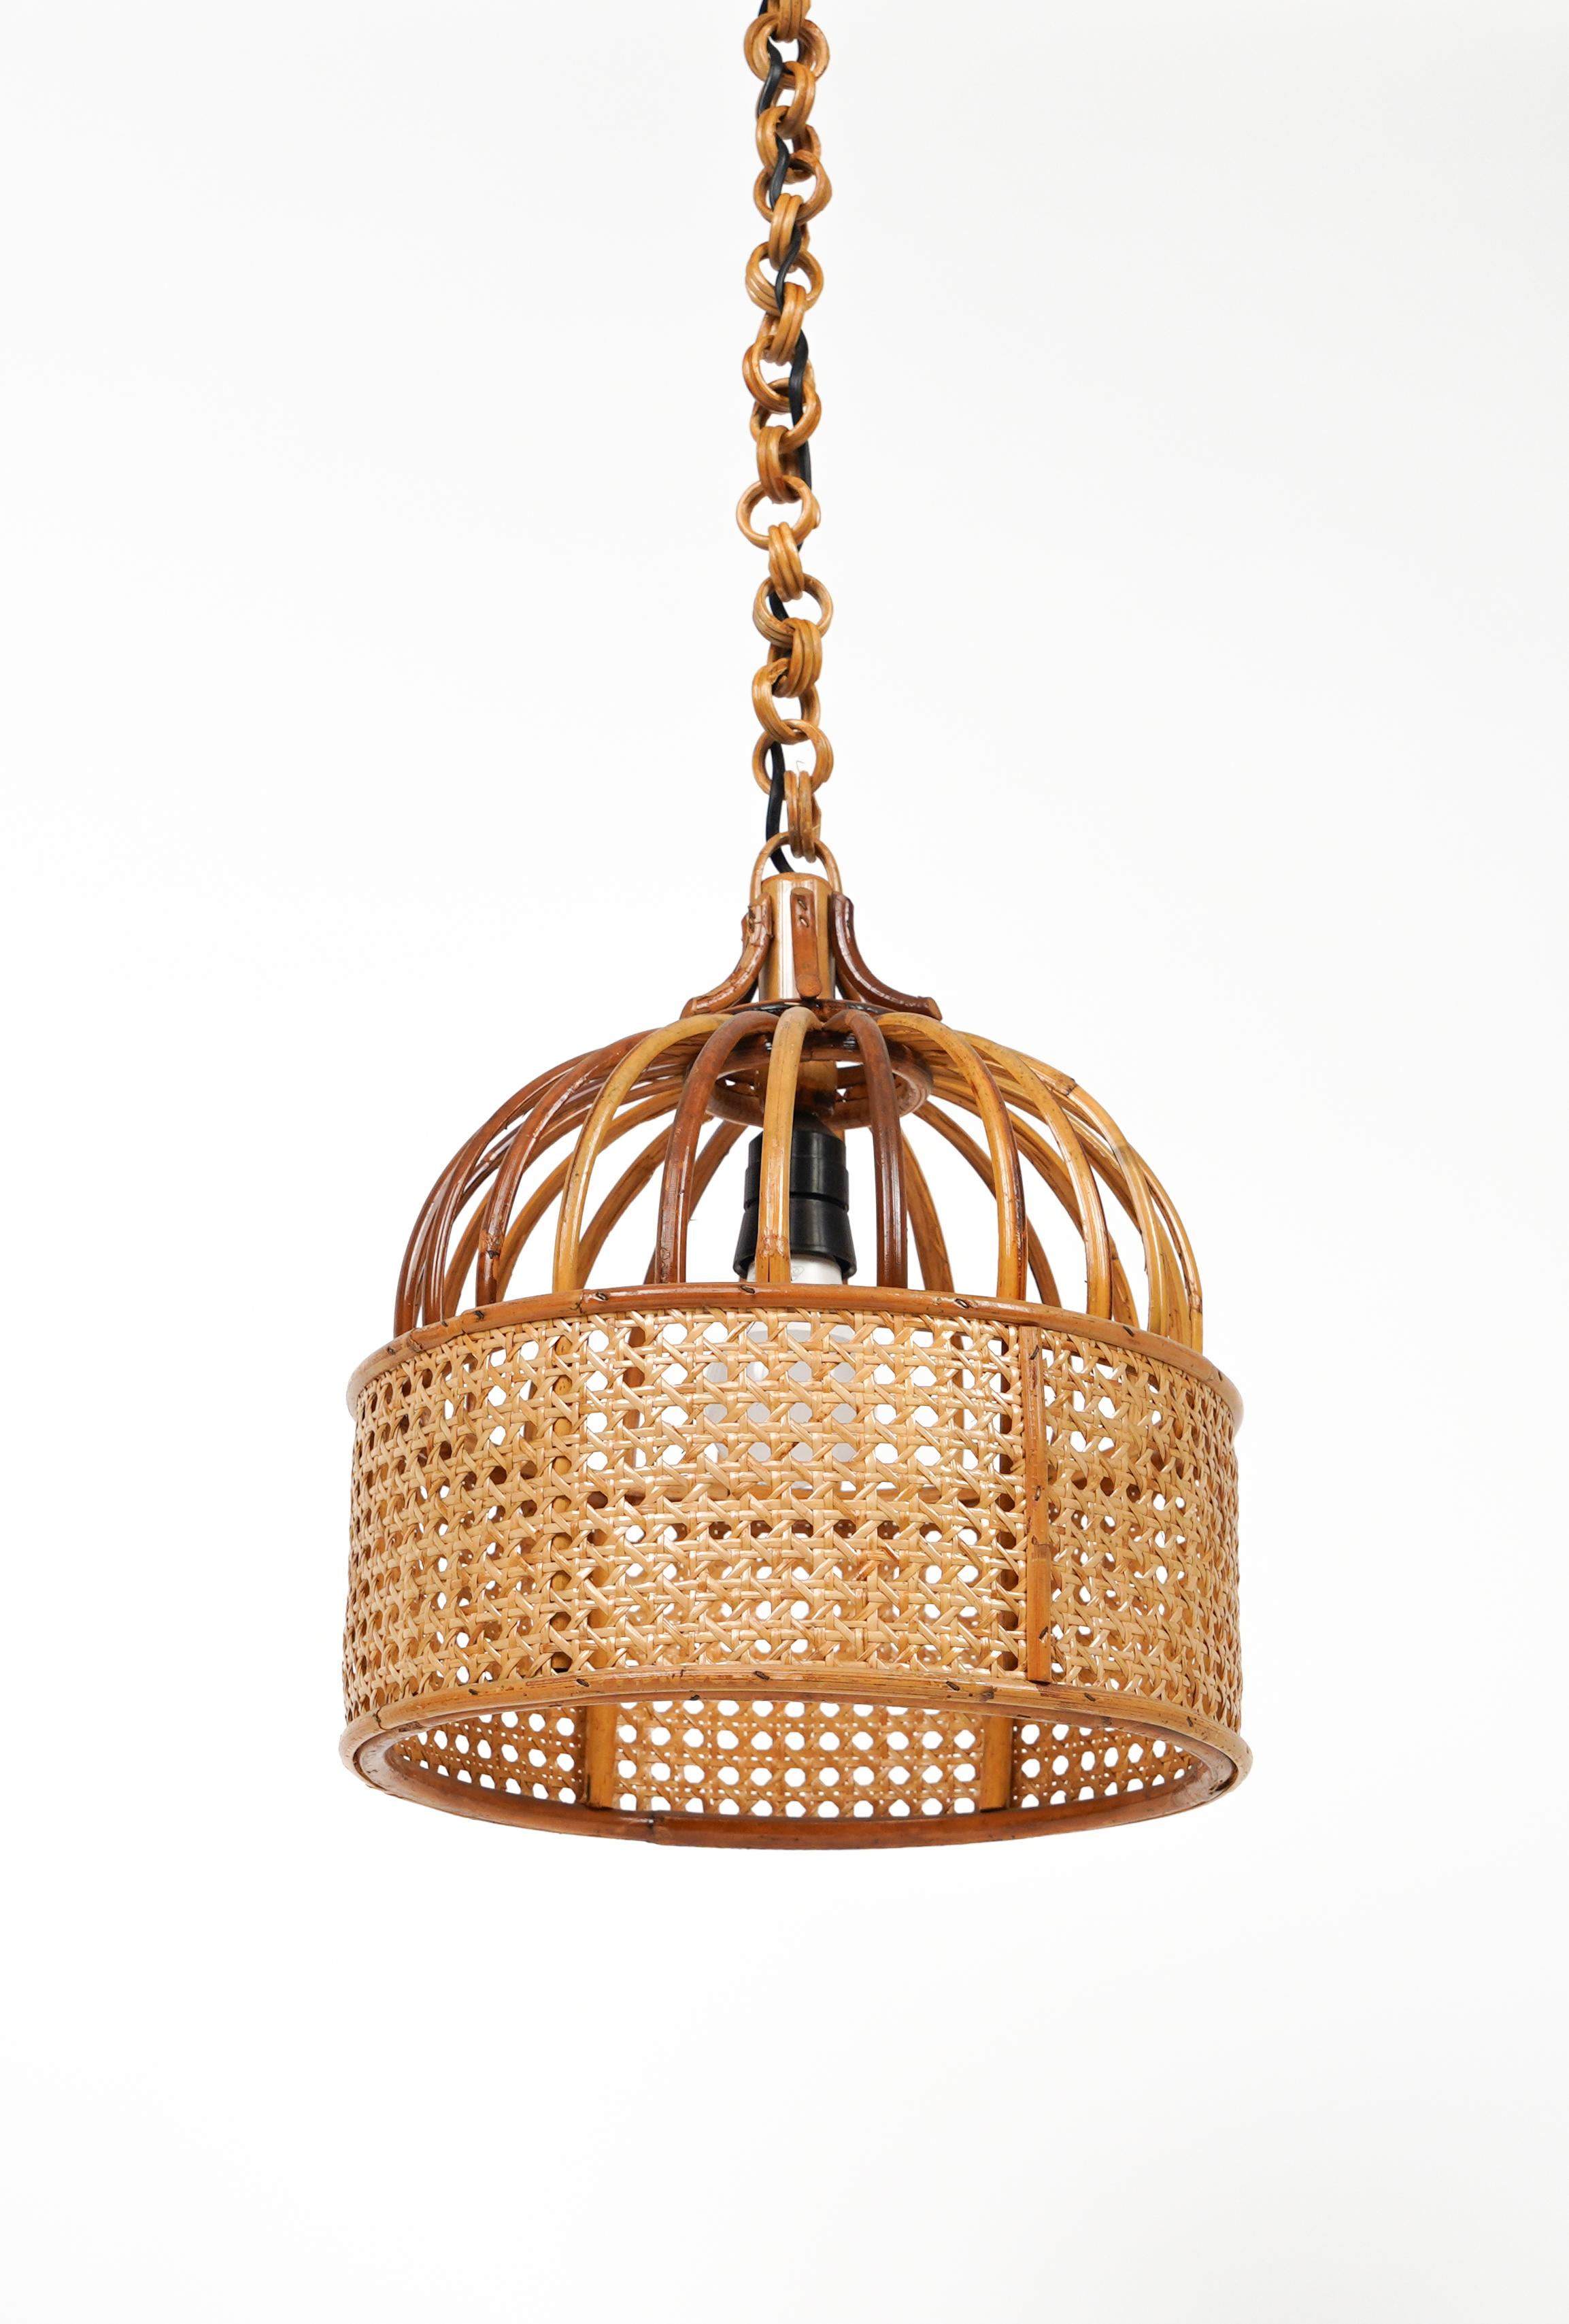 Midcentury French Riviera Rattan and Wicker Chandelier, Italy 1970s For Sale 1